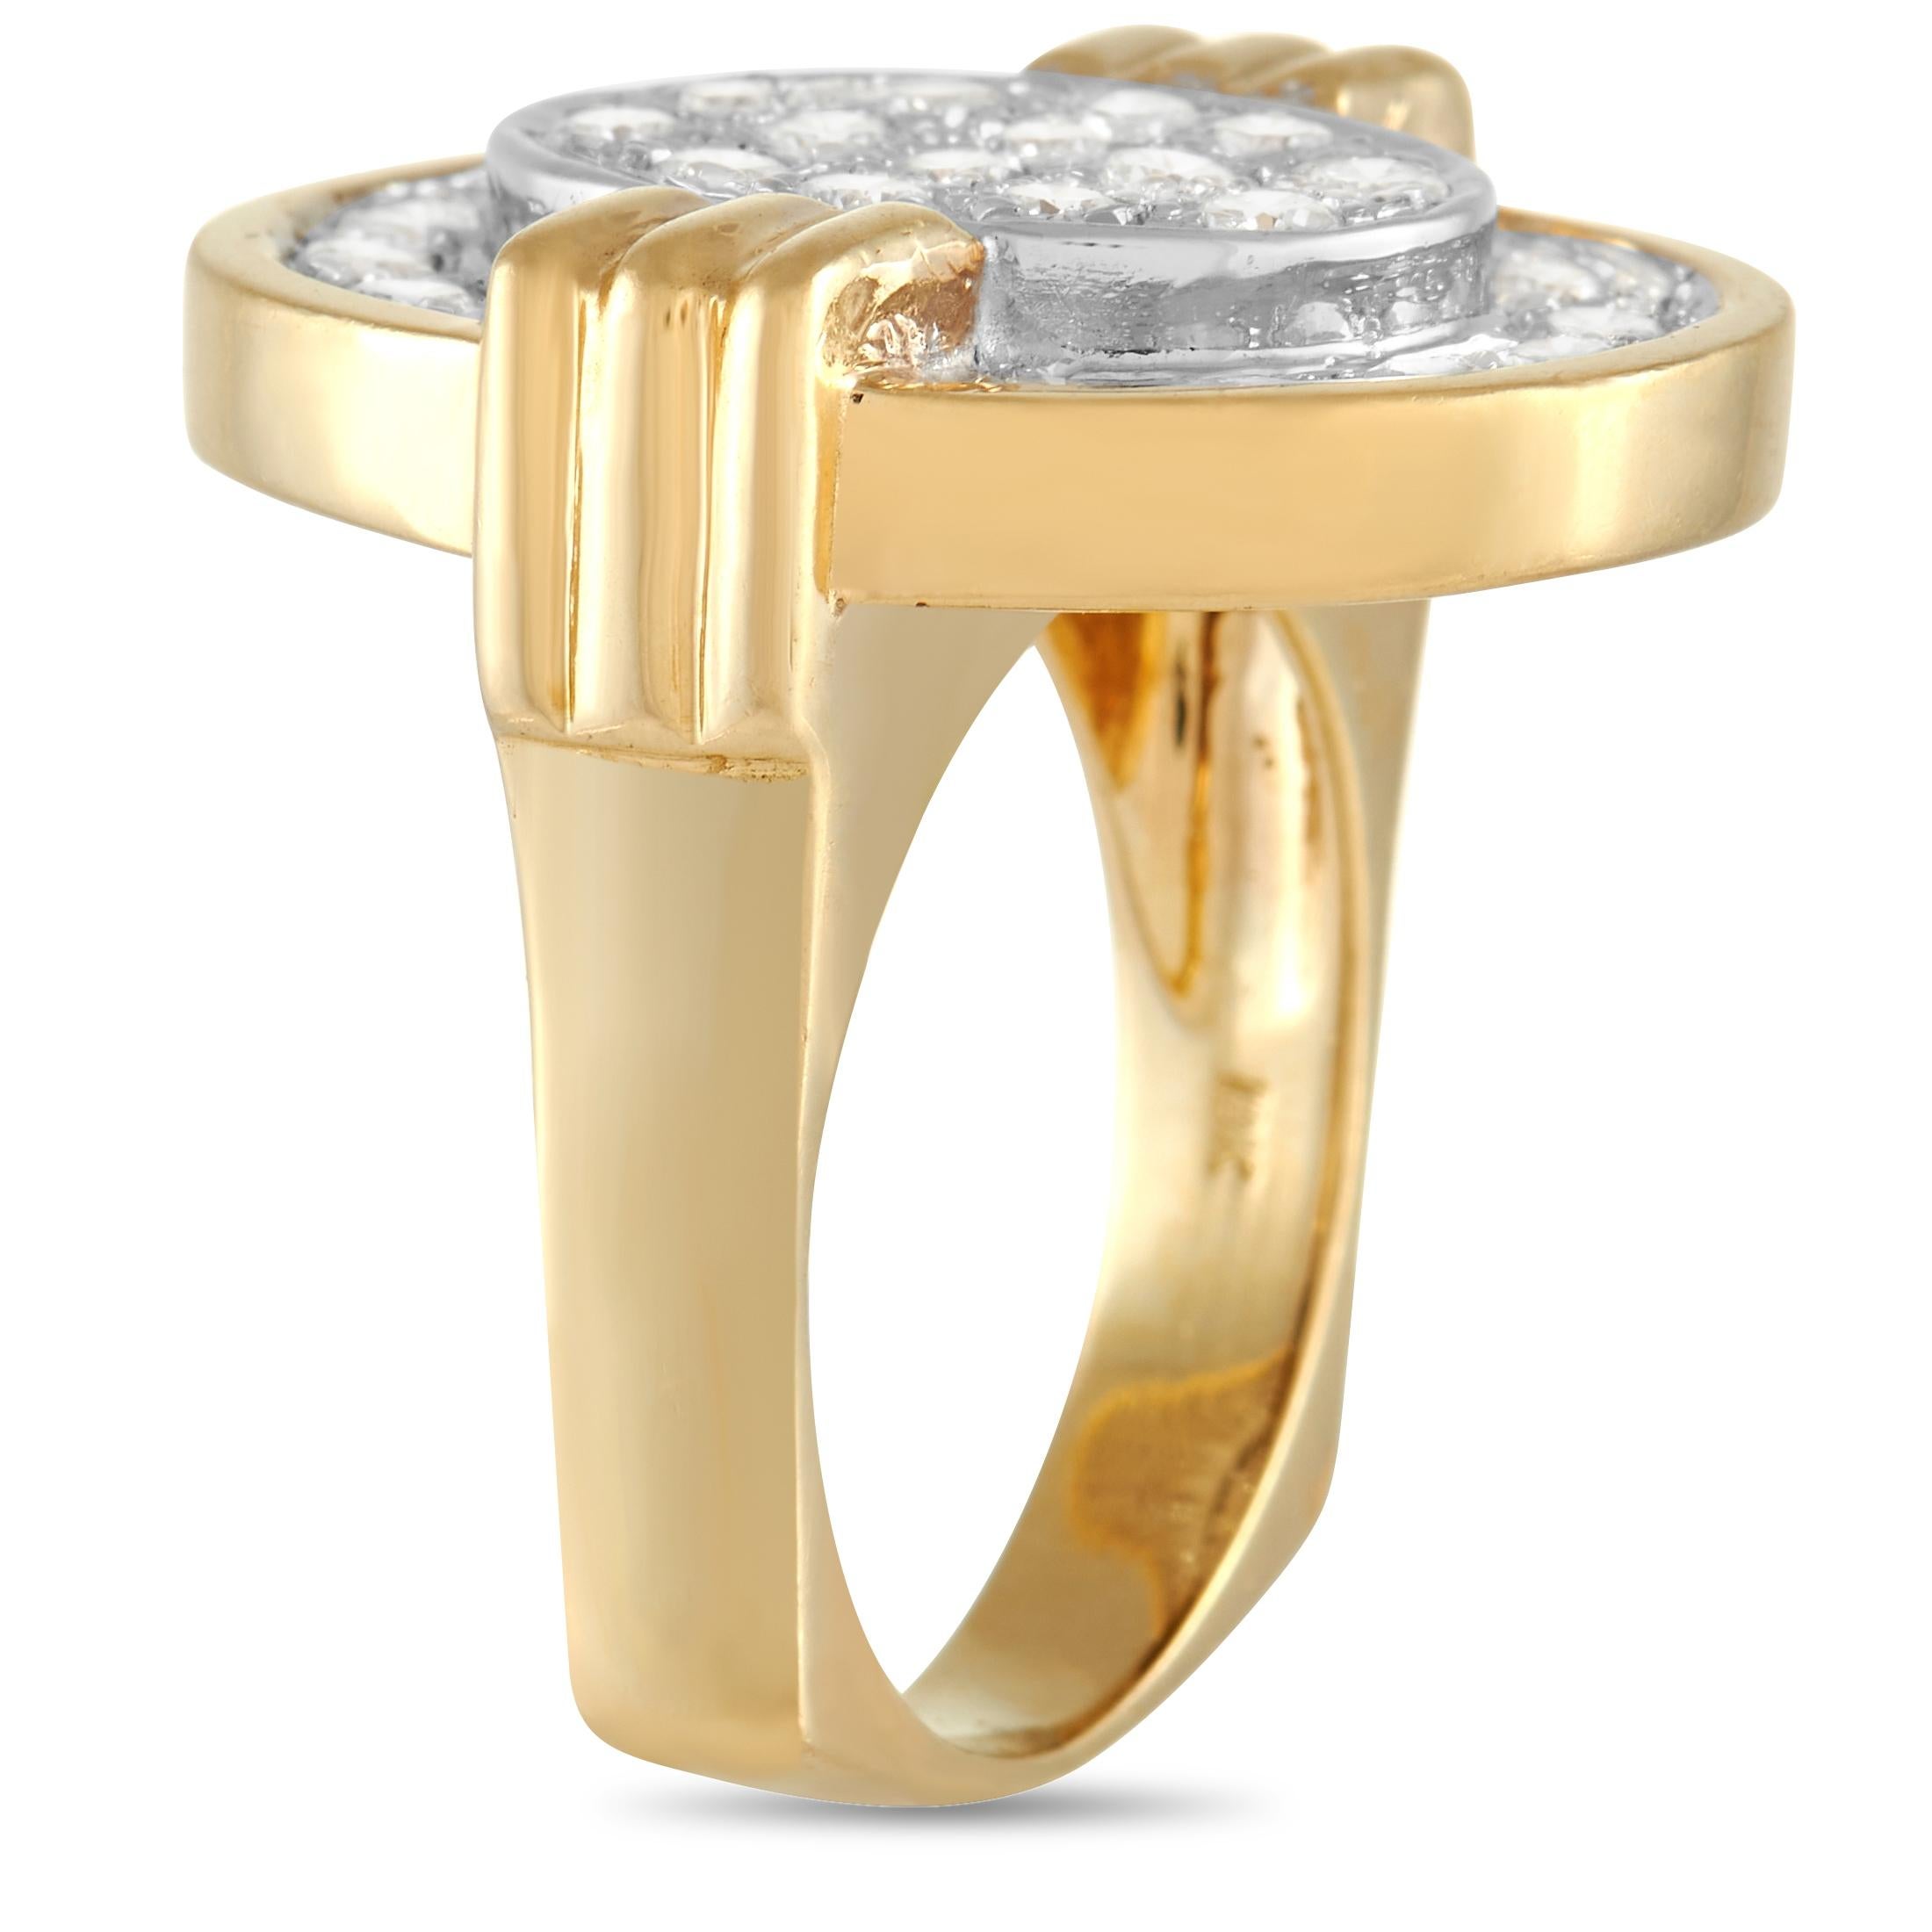 This unique LB Exclusive 18K Yellow Gold 1.50 ct Diamond Ring is a pretty alternative to the classic diamond halo ring. The ring is made with 18K yellow gold and set with 1.50 carats of G color and VS clarity, round diamonds surrounded set in a